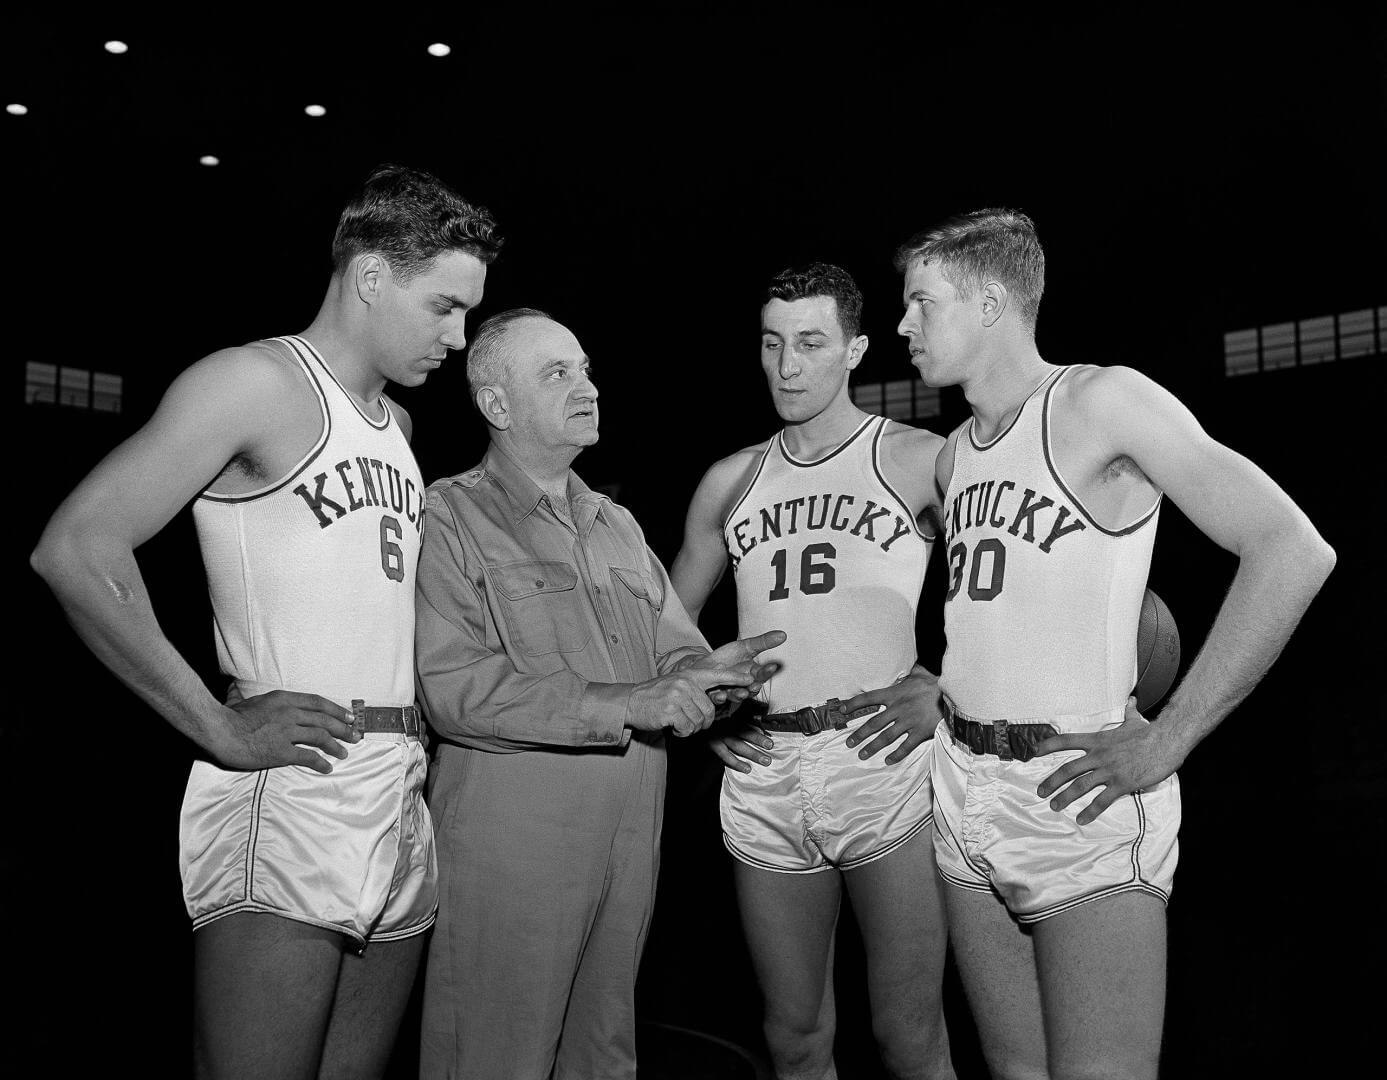 FILE - In this Jan. 16, 1954, file photo, Kentucky basketball coach Adolph Rupp talks to players, from left, Cliff Hagan, Lou Tsioropoulos and Frank Ramsey (30) in Lexington, Ky. Tsioropoulos, a member of Kentucky's 1951 NCAA national championship team and the unbeaten `53-54 squad who went on to win two NBA titles with the Boston Celtics, has died. He was 84. Tsioropoulos' nephew, Michael Johnson, said Wednesday night, Aug. 26, 2015, that his uncle died Saturday in Louisville, Ky., of natural causes. A memorial service was held there Wednesday. He would have turned 85 on Monday. (AP Photo/John Wyatt, File)